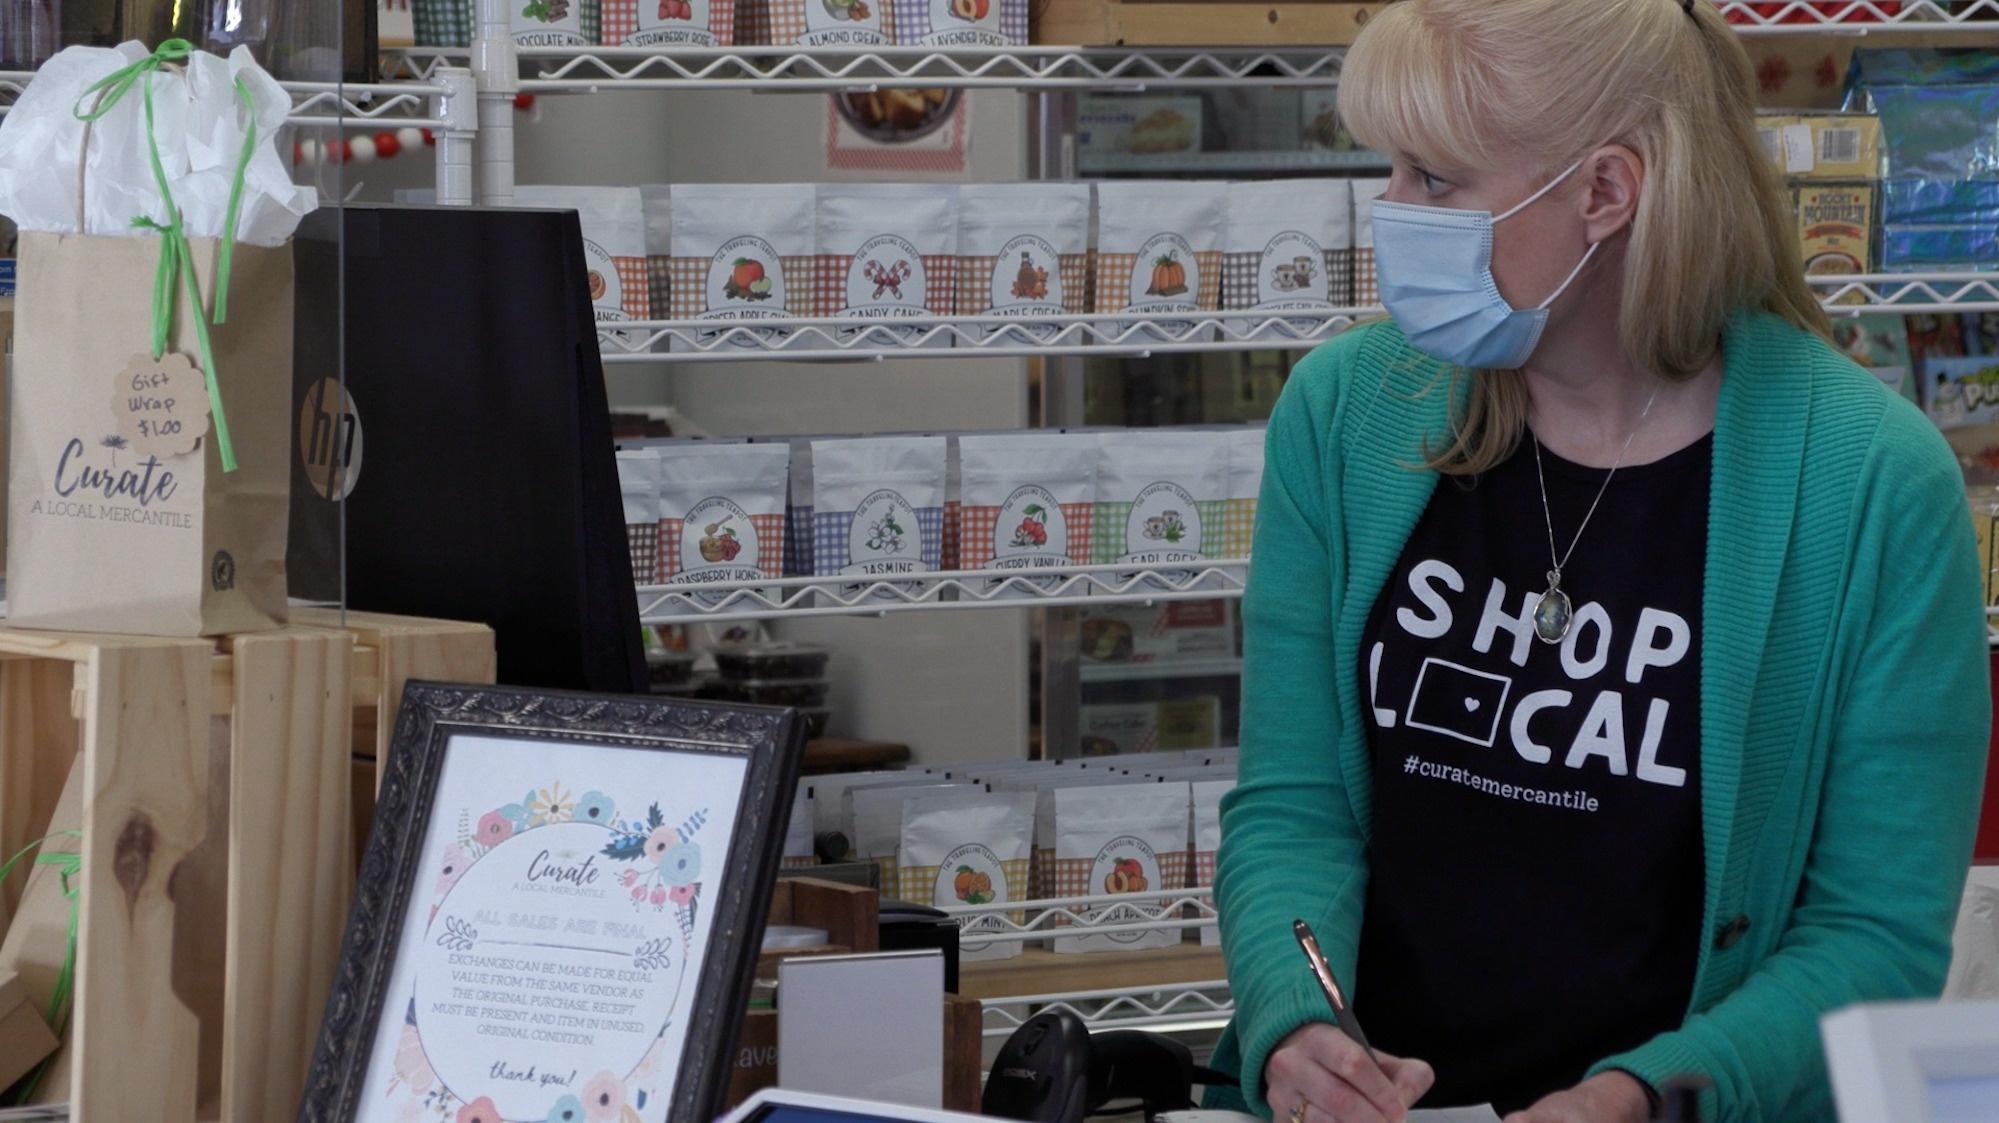 Masks are now required at indoor businesses in Arapahoe County. But some shoppers coming from counties without mask mandates may not even realize they've crossed county lines.